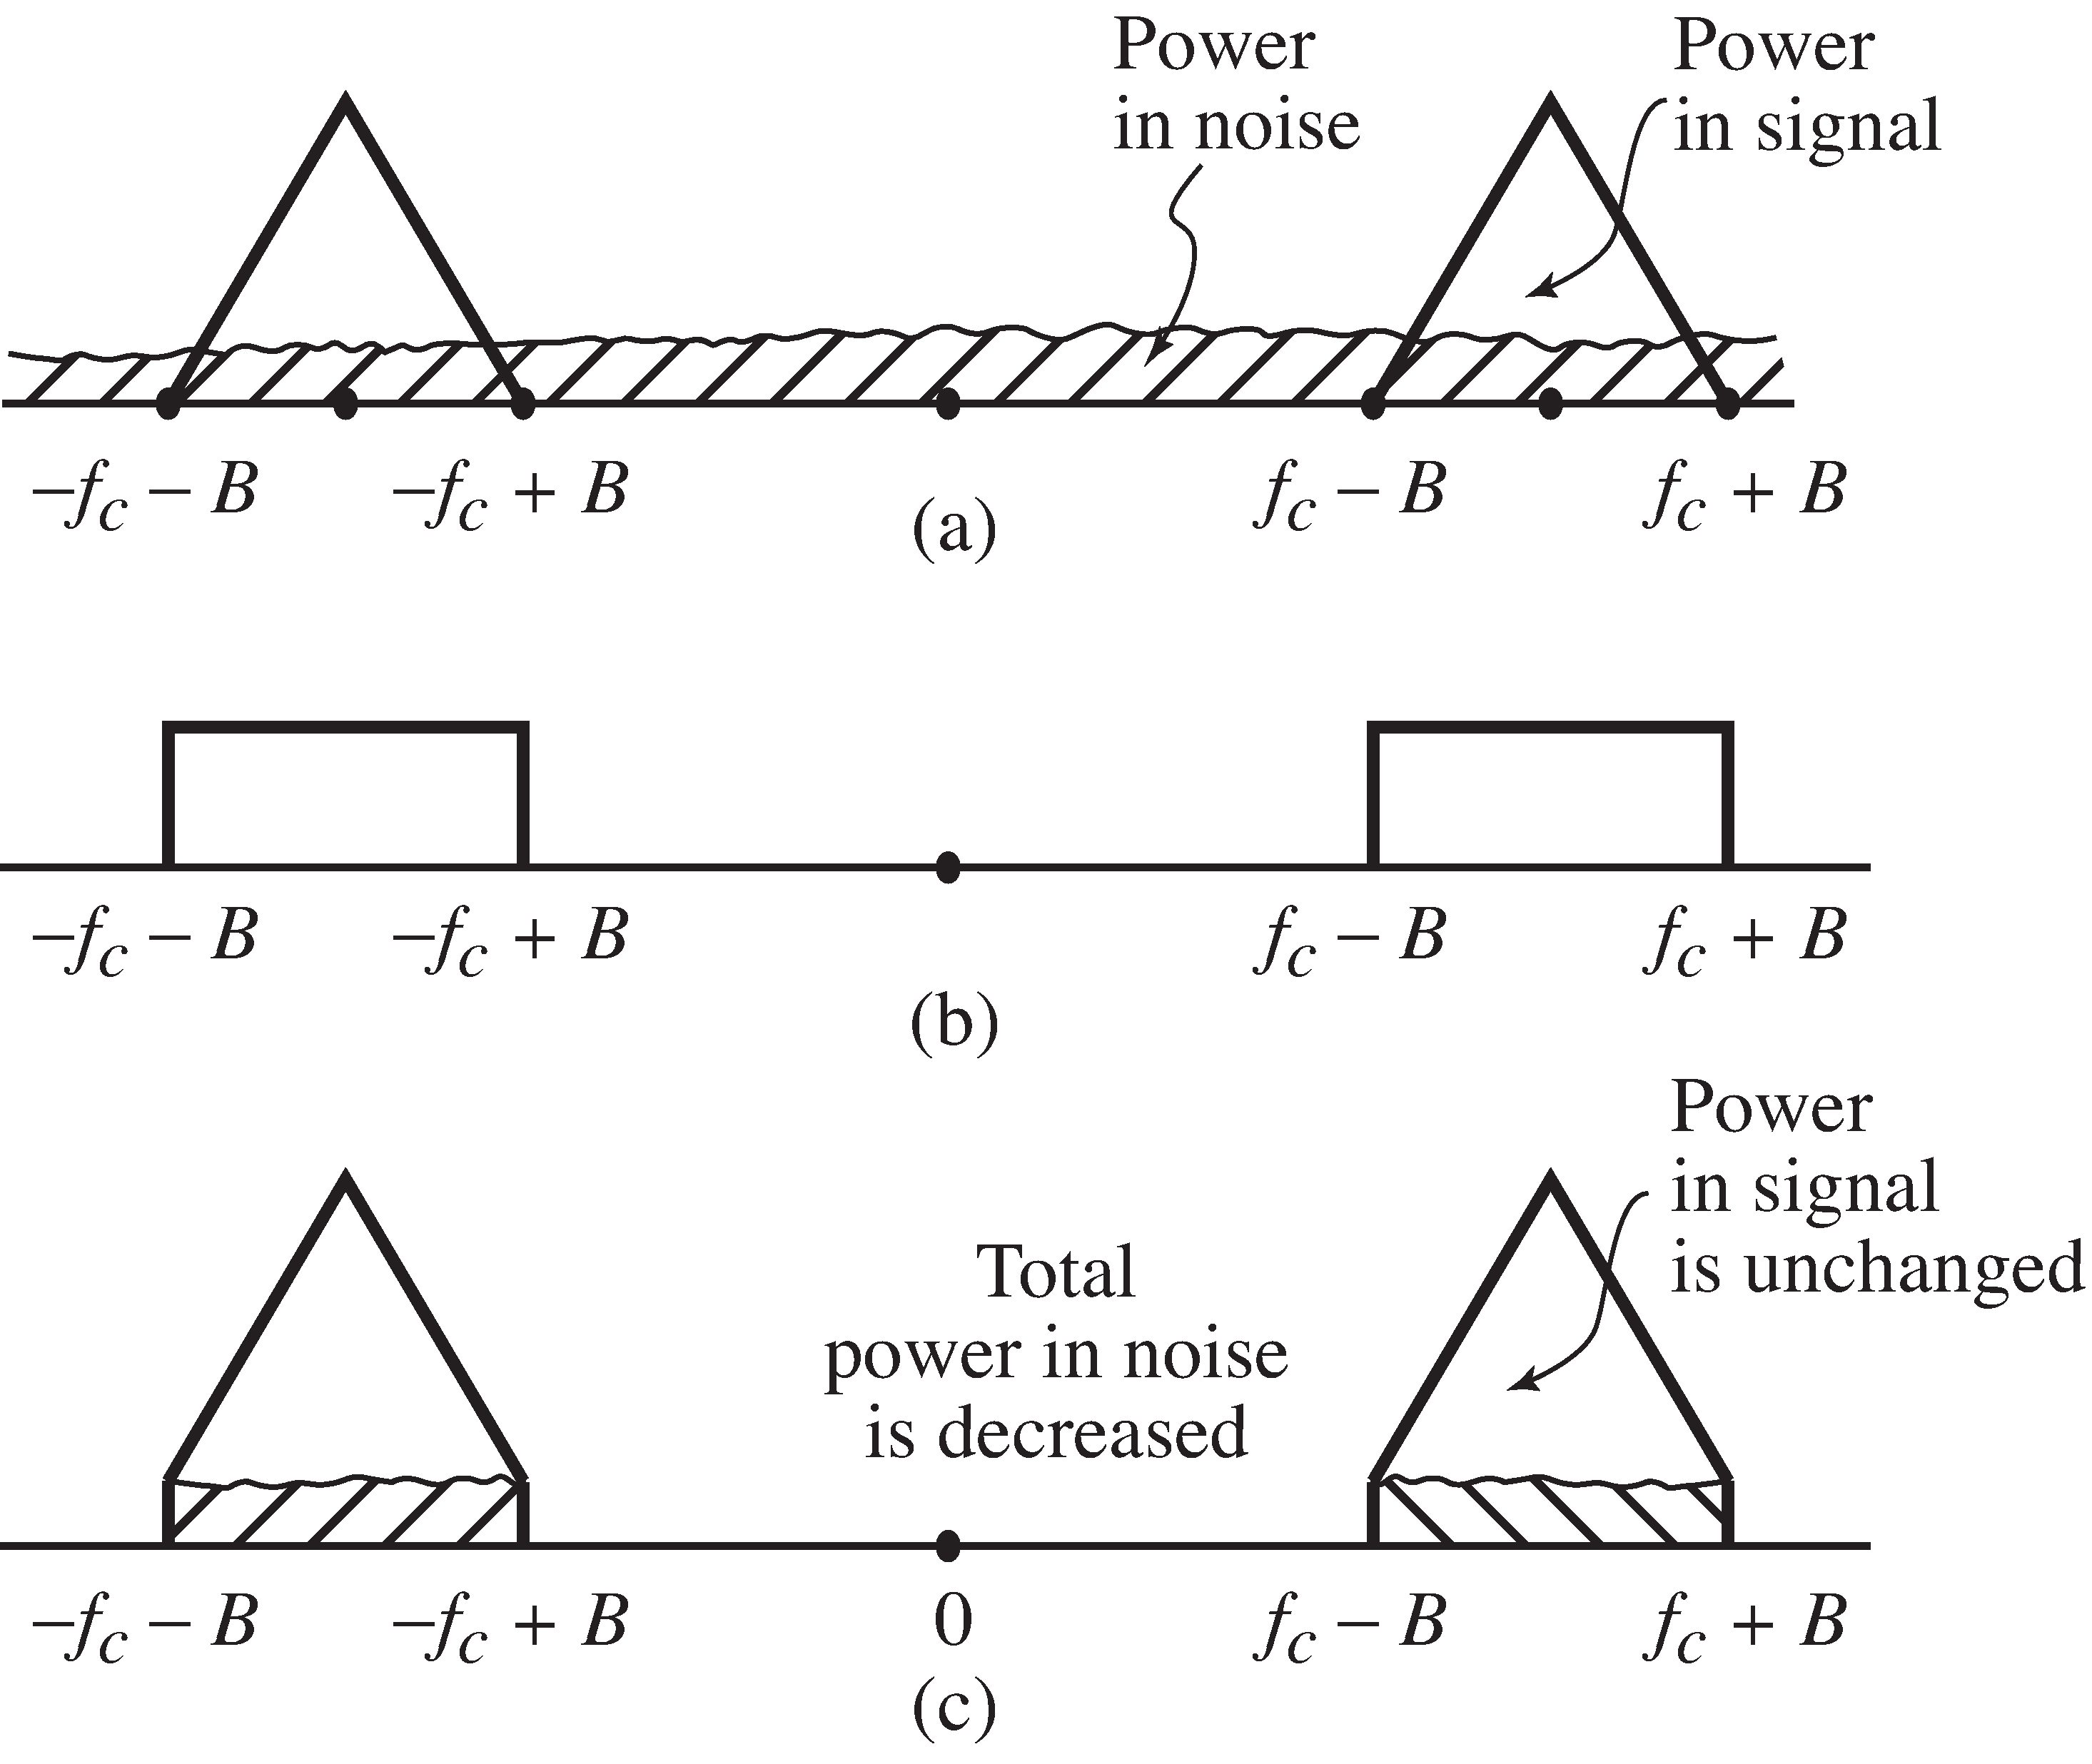 The signal-to-noise ratio is depicted graphically as the ratio of the power of the signal (the area under the triangles) to the power in the noise (the shaded area). After the bandpass filter, the power in the noise decreases, and so the SNR increases.